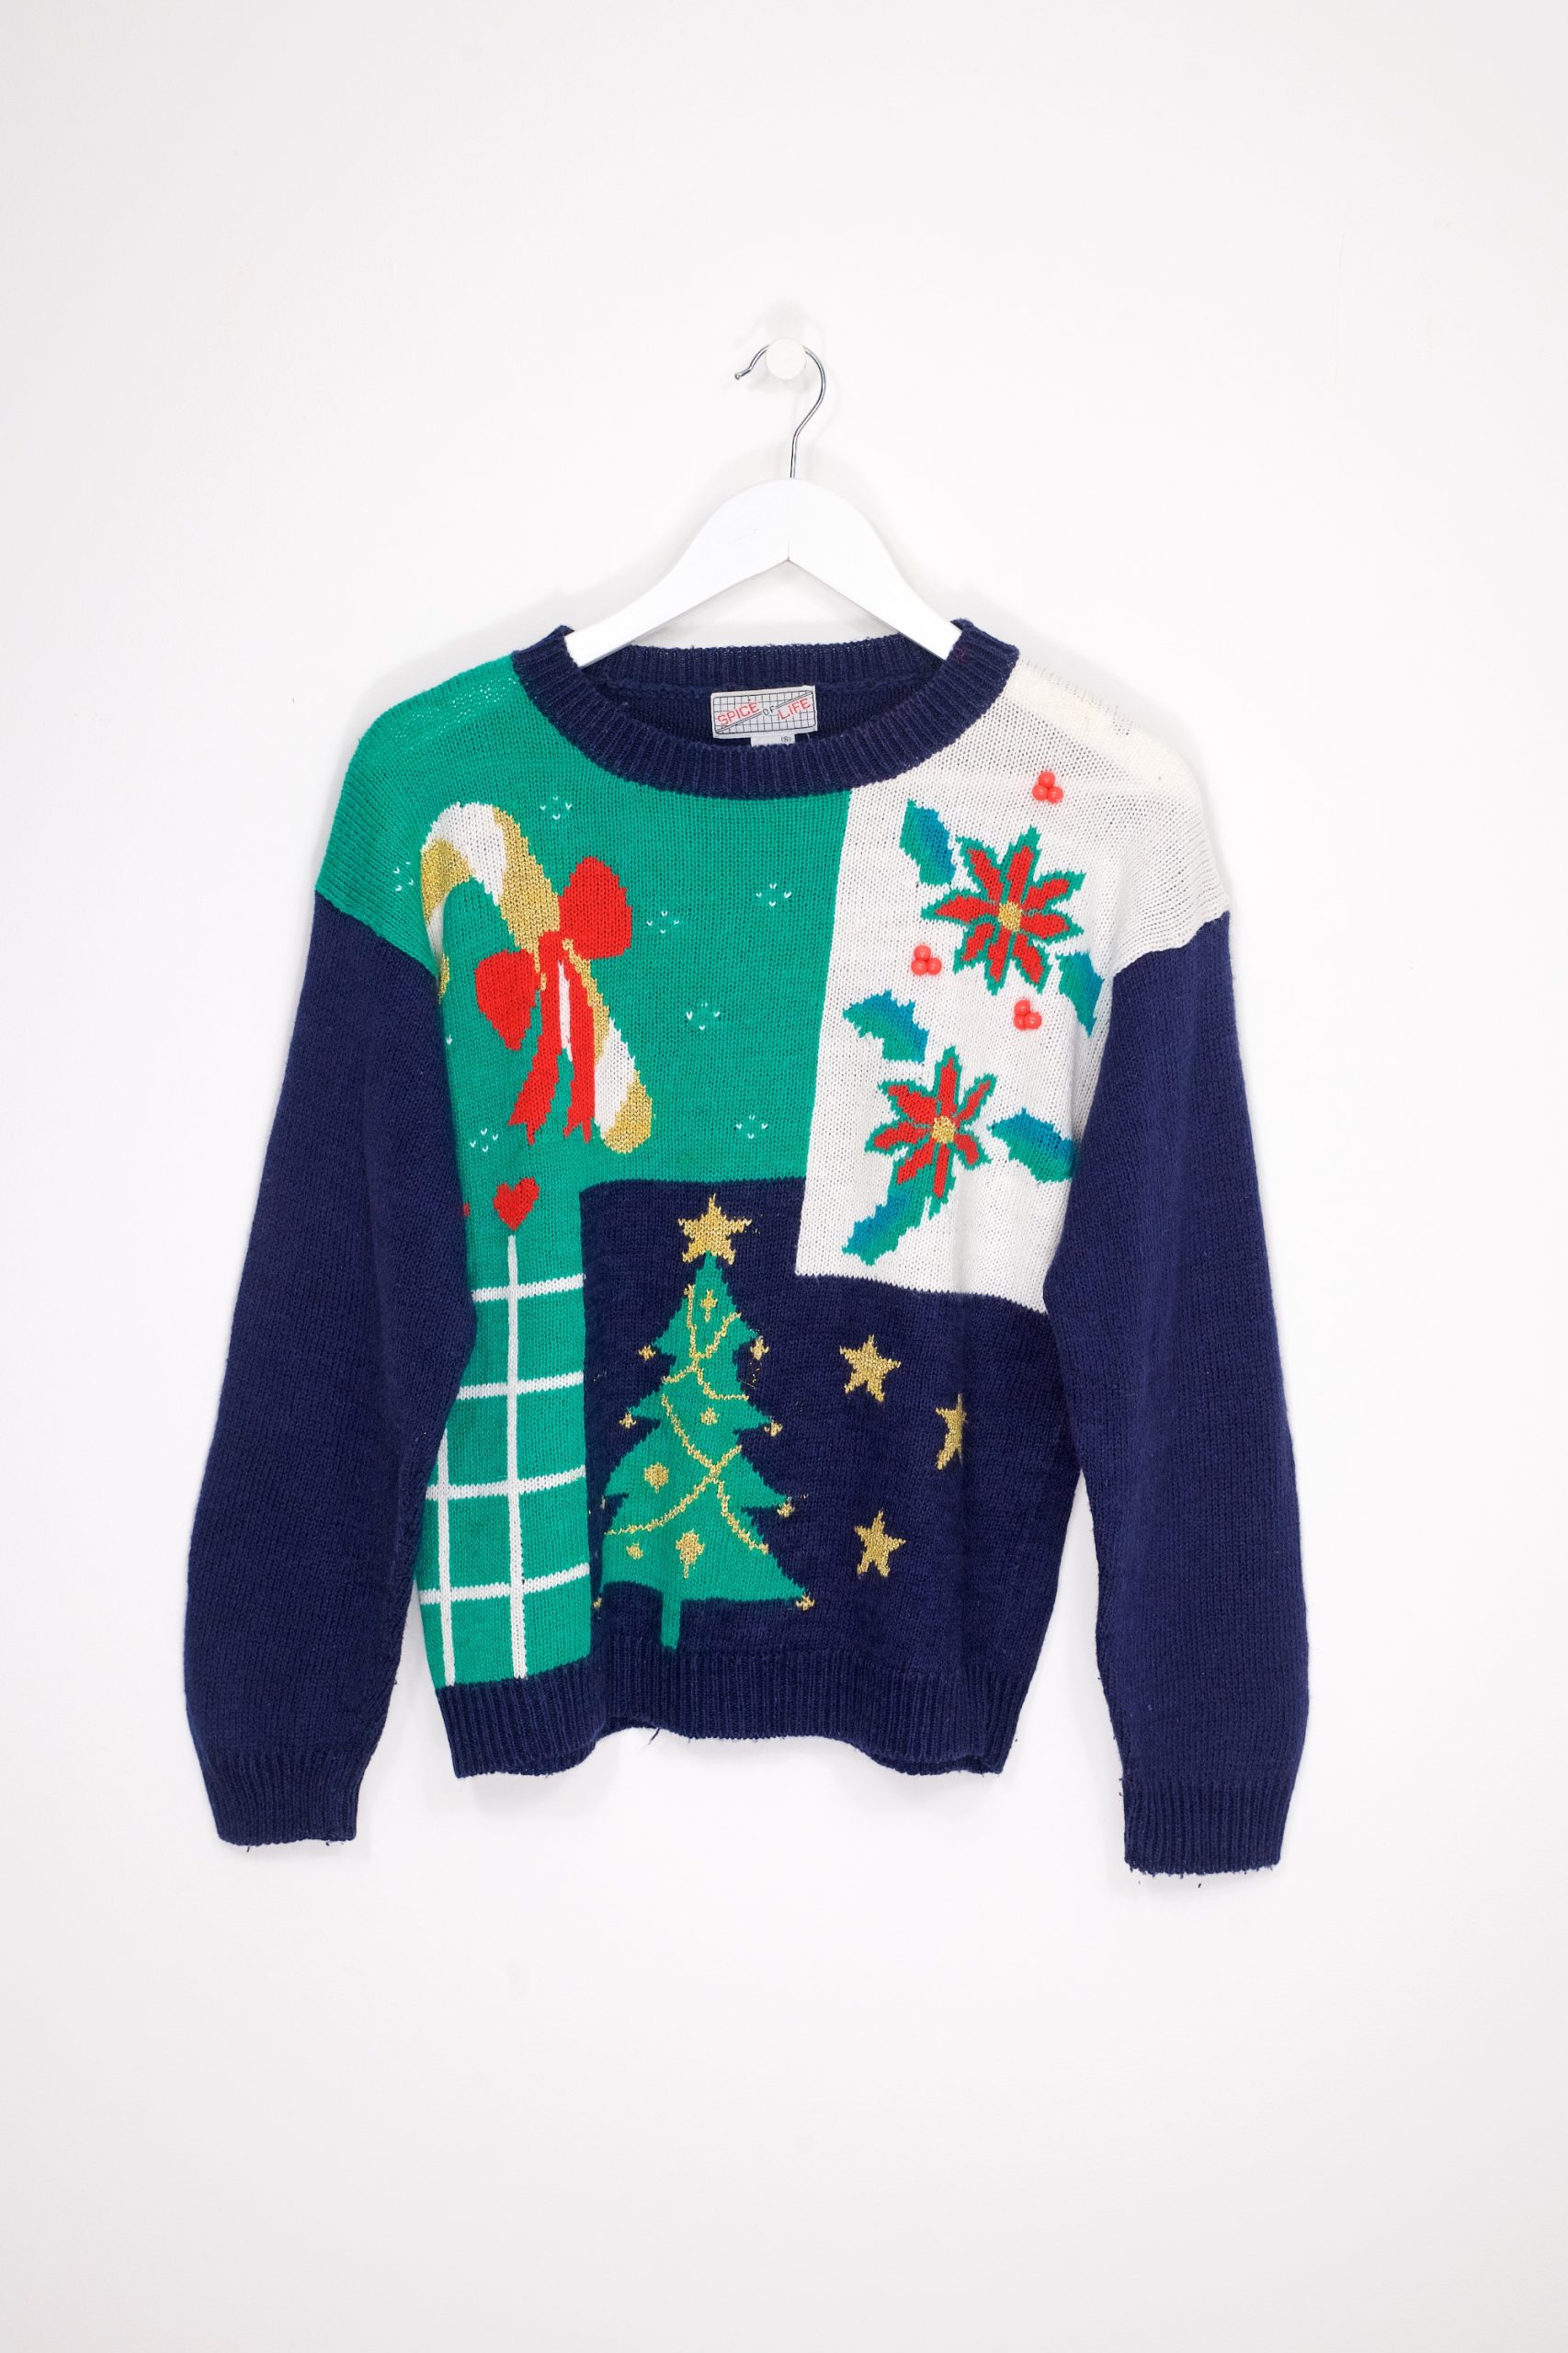 Candy Cane Christmas Jumper | Save the Children Shop